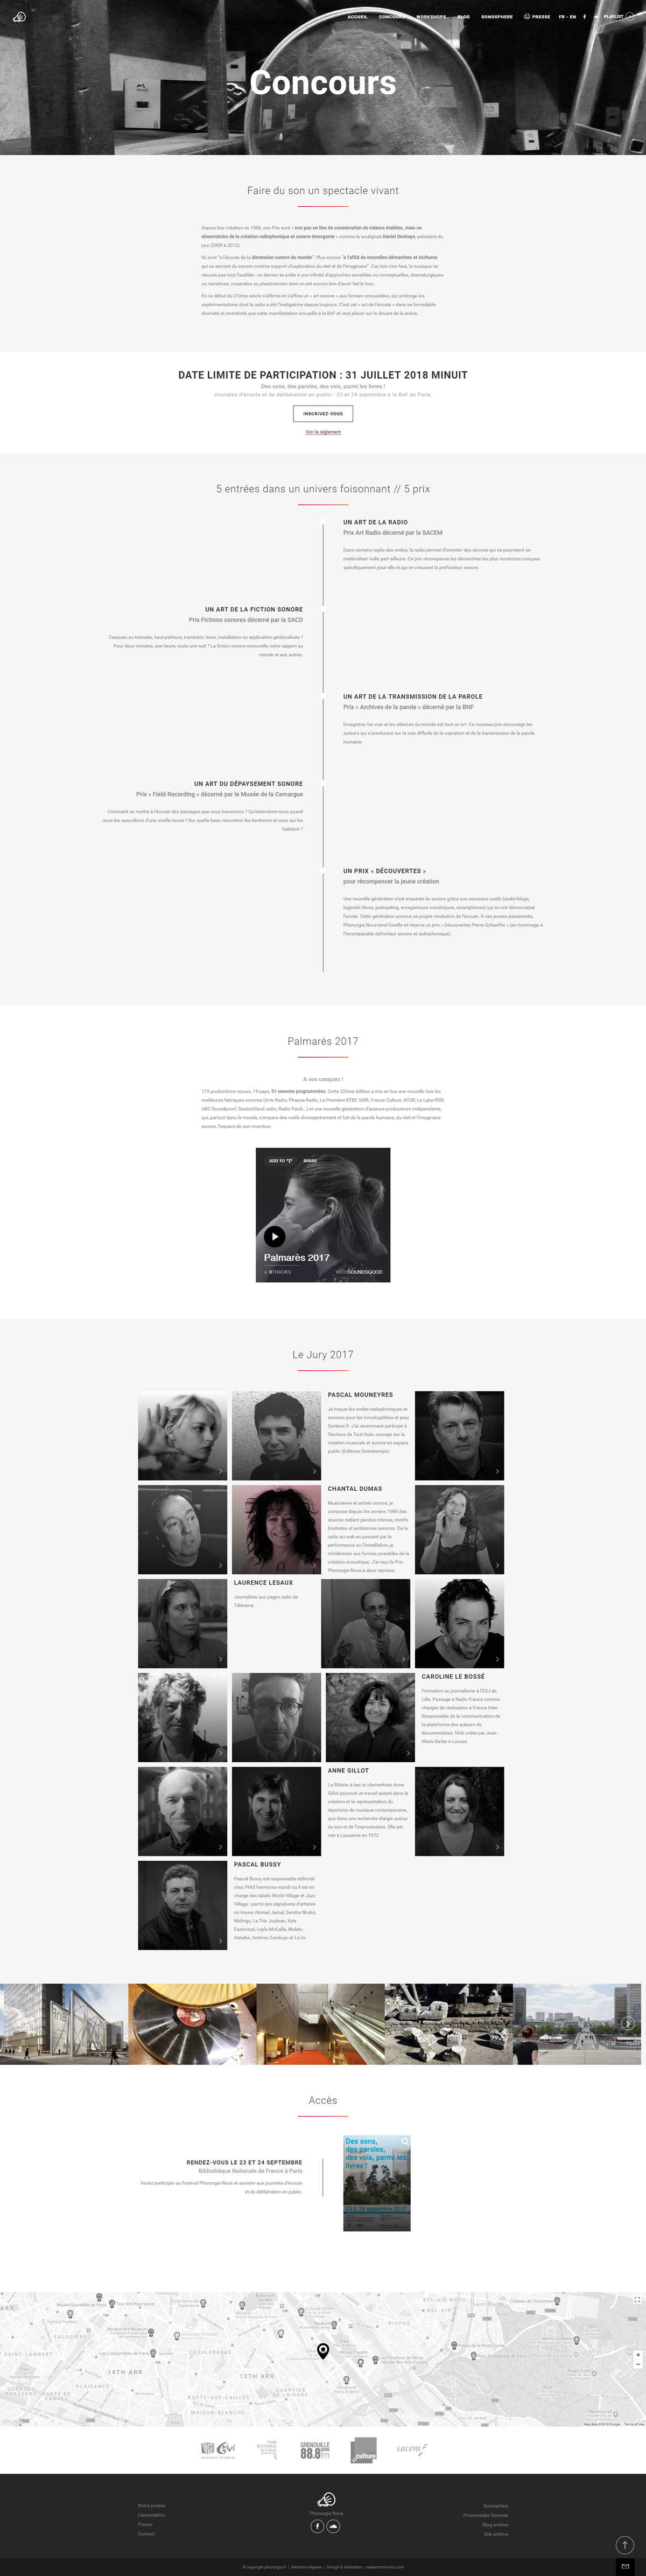 Webdesign Page Concours